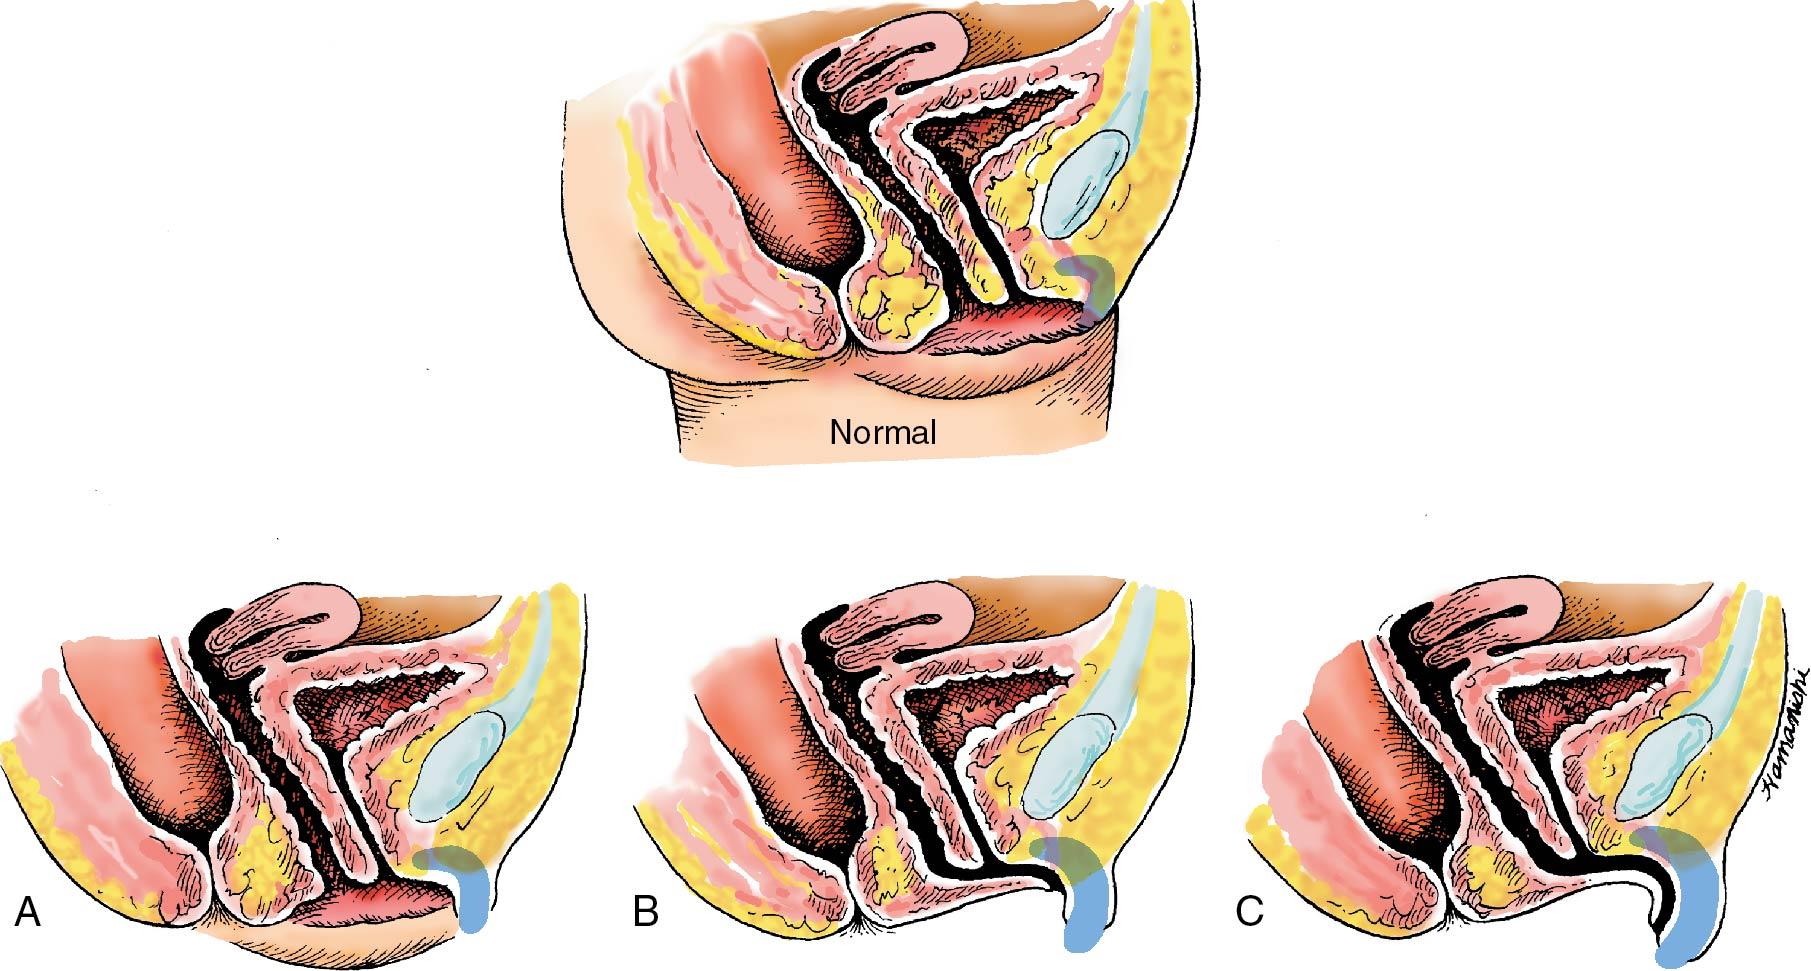 Fig. 11.2, Sagittal views of genital deformities seen in female infants who are masculinized. A, Minimal masculinization with slight enlargement of the clitoris. B, Labial fusion and more marked enlargement of the clitoris. C, Complete labial fusion, enlargement of the clitoris, and formation of a partial penile urethra.